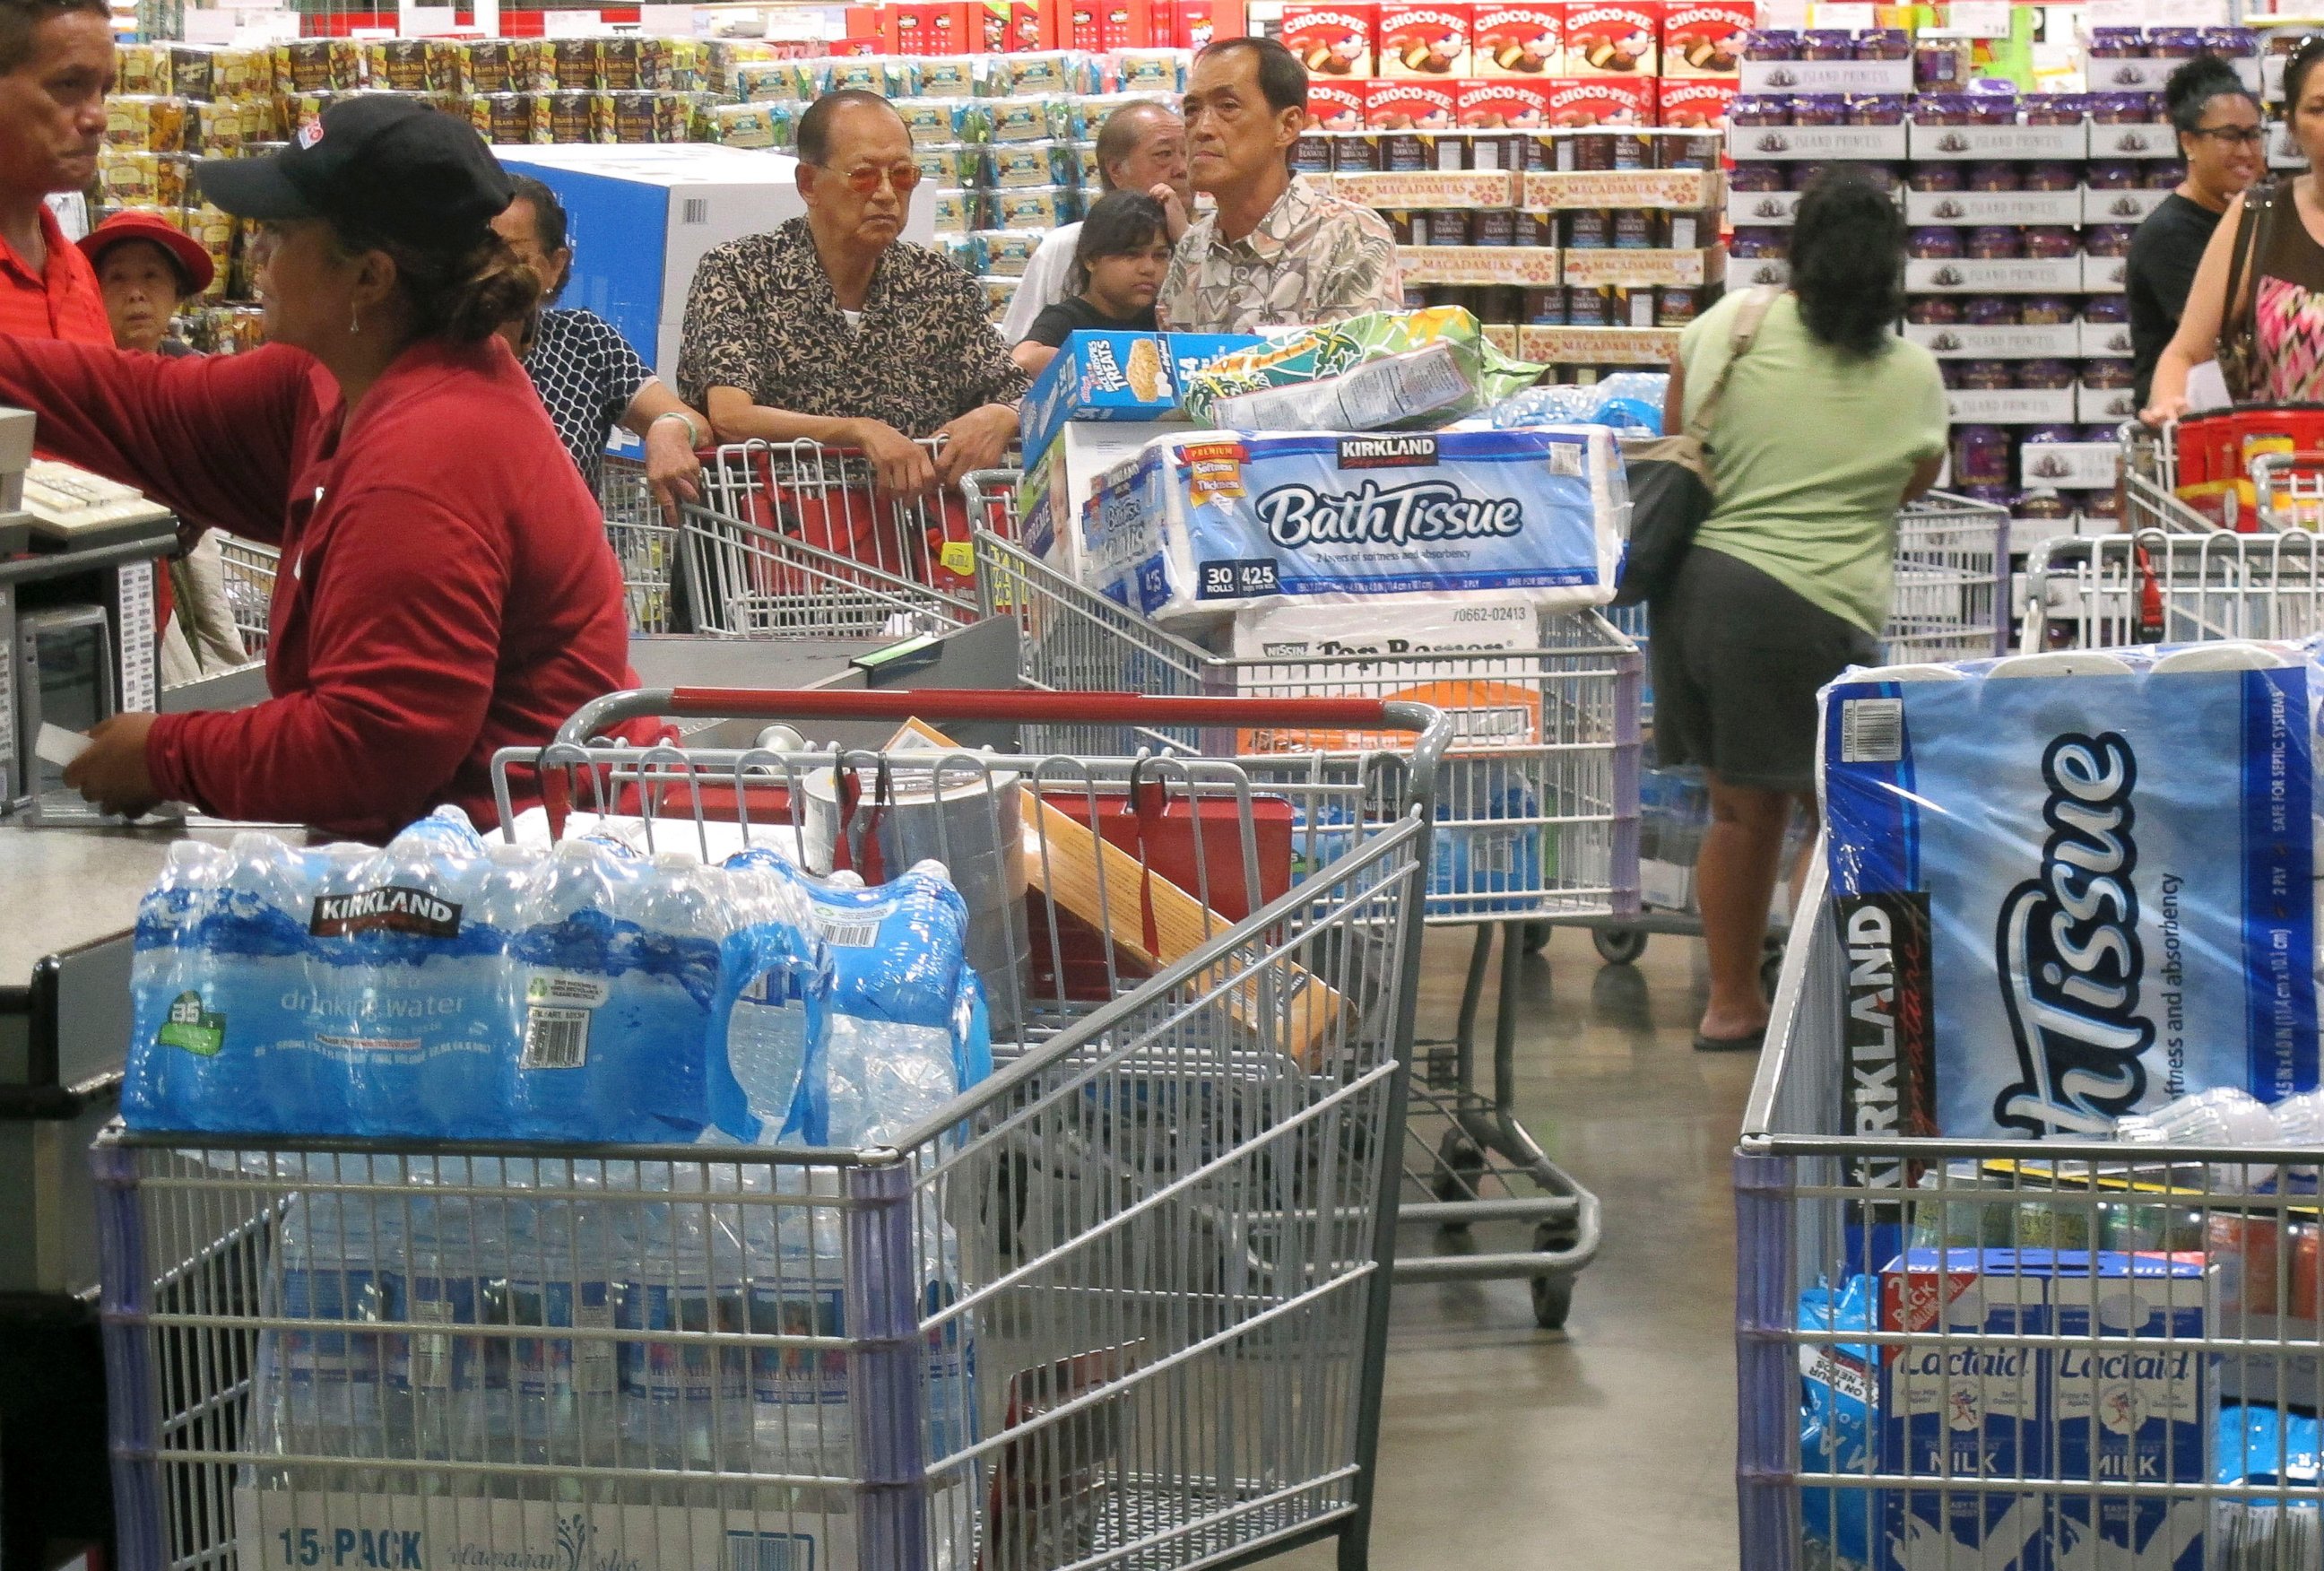 PHOTO: Shoppers stock up on cases of bottled water and other supplies in preparation for a hurricane and tropical storm heading toward Hawaii at the Iwilei Costco in Honolulu on Tuesday, Aug. 5, 2014.